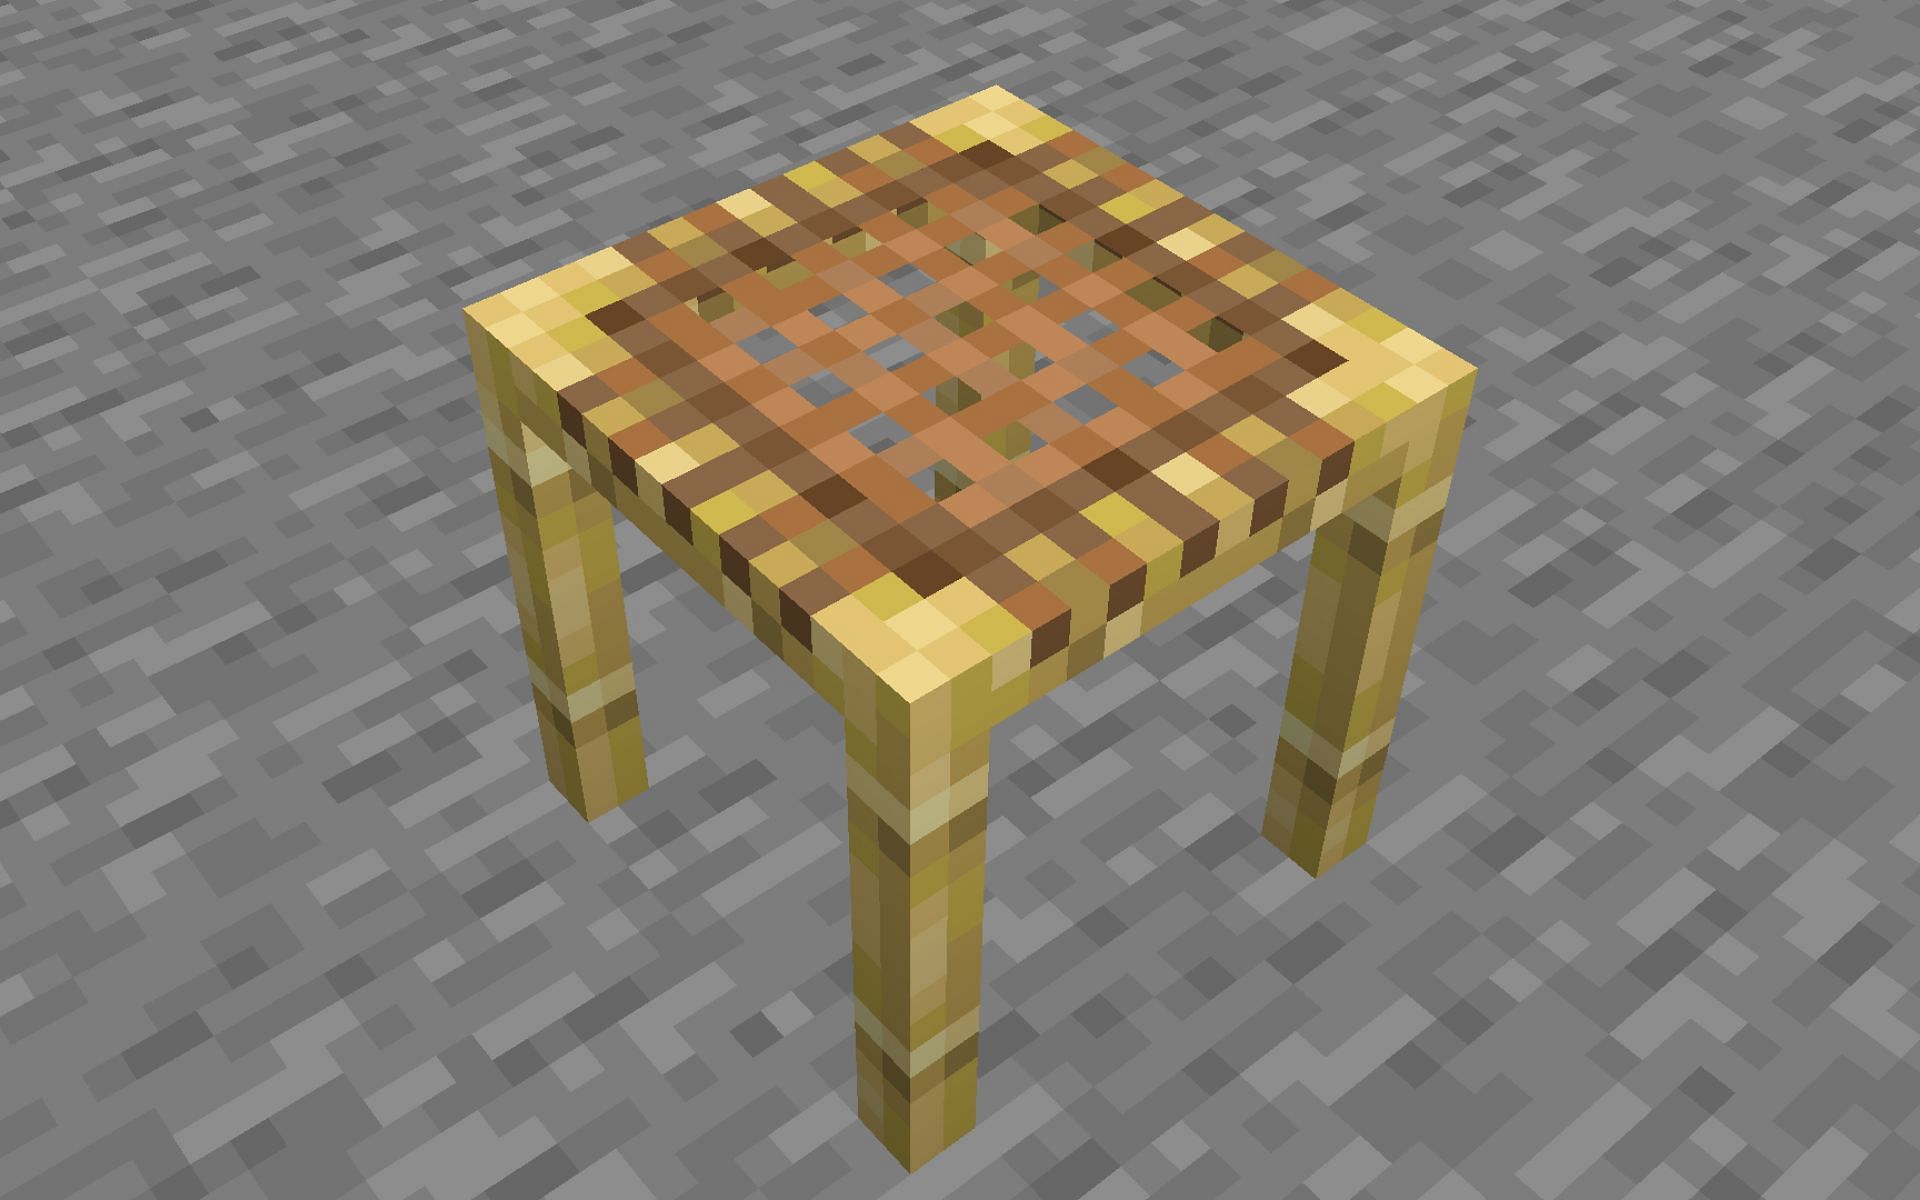 Scaffolding blocks slow players down when they&#039;re crouching in Minecraft (Image via Mojang)